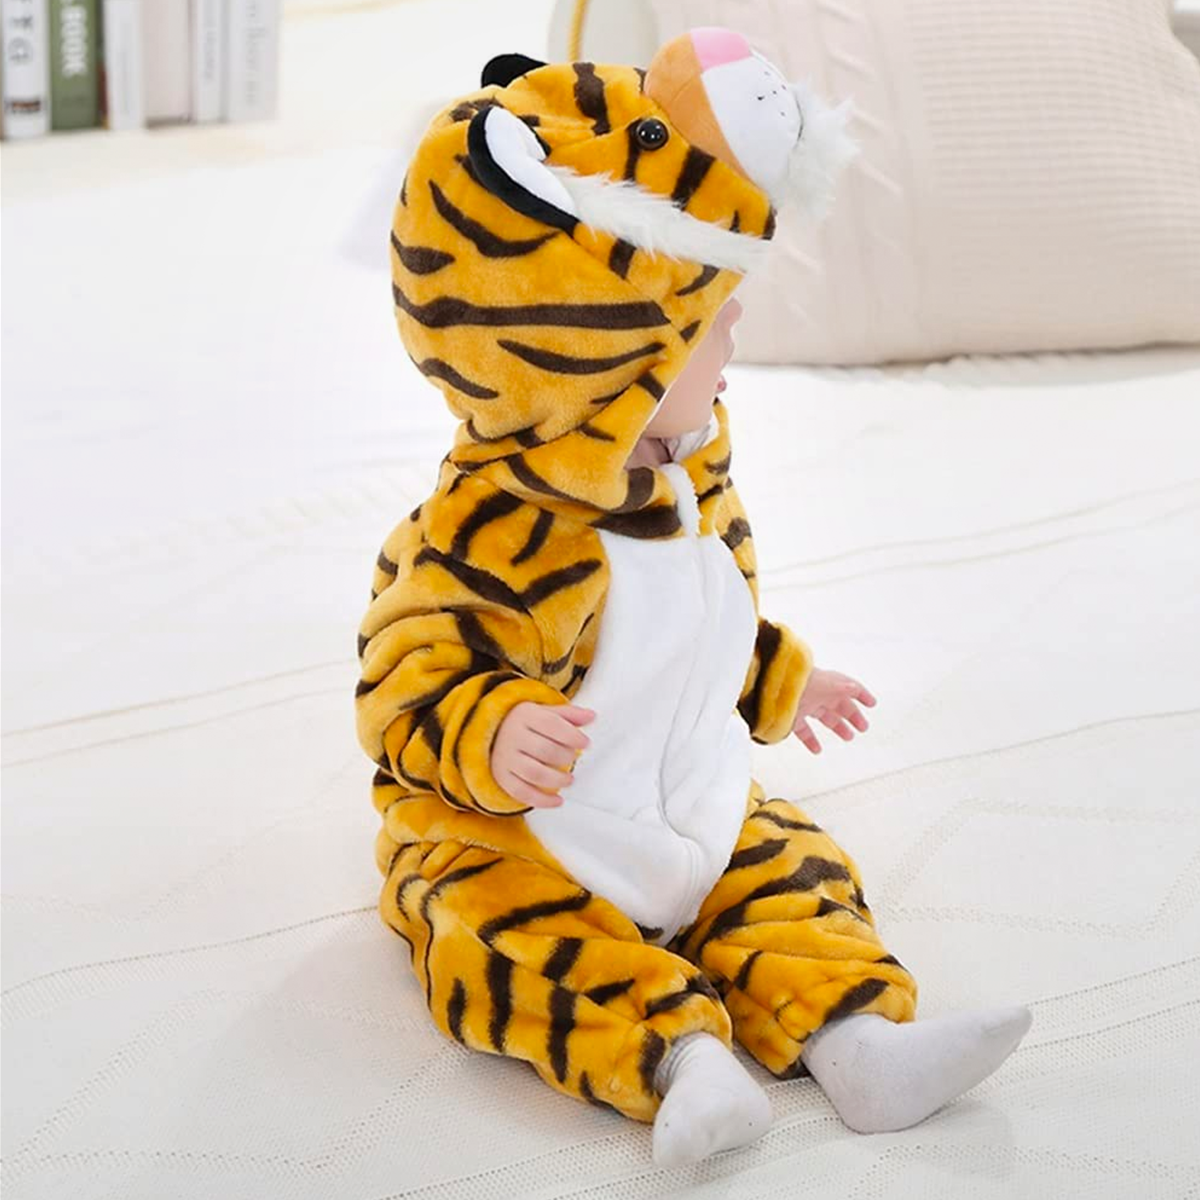 Animal Costume Toddler Winter Autumn Flannel Hooded Romper Cosplay Outfits & Jumpsuit For Unisex Baby & Kids - Tiger